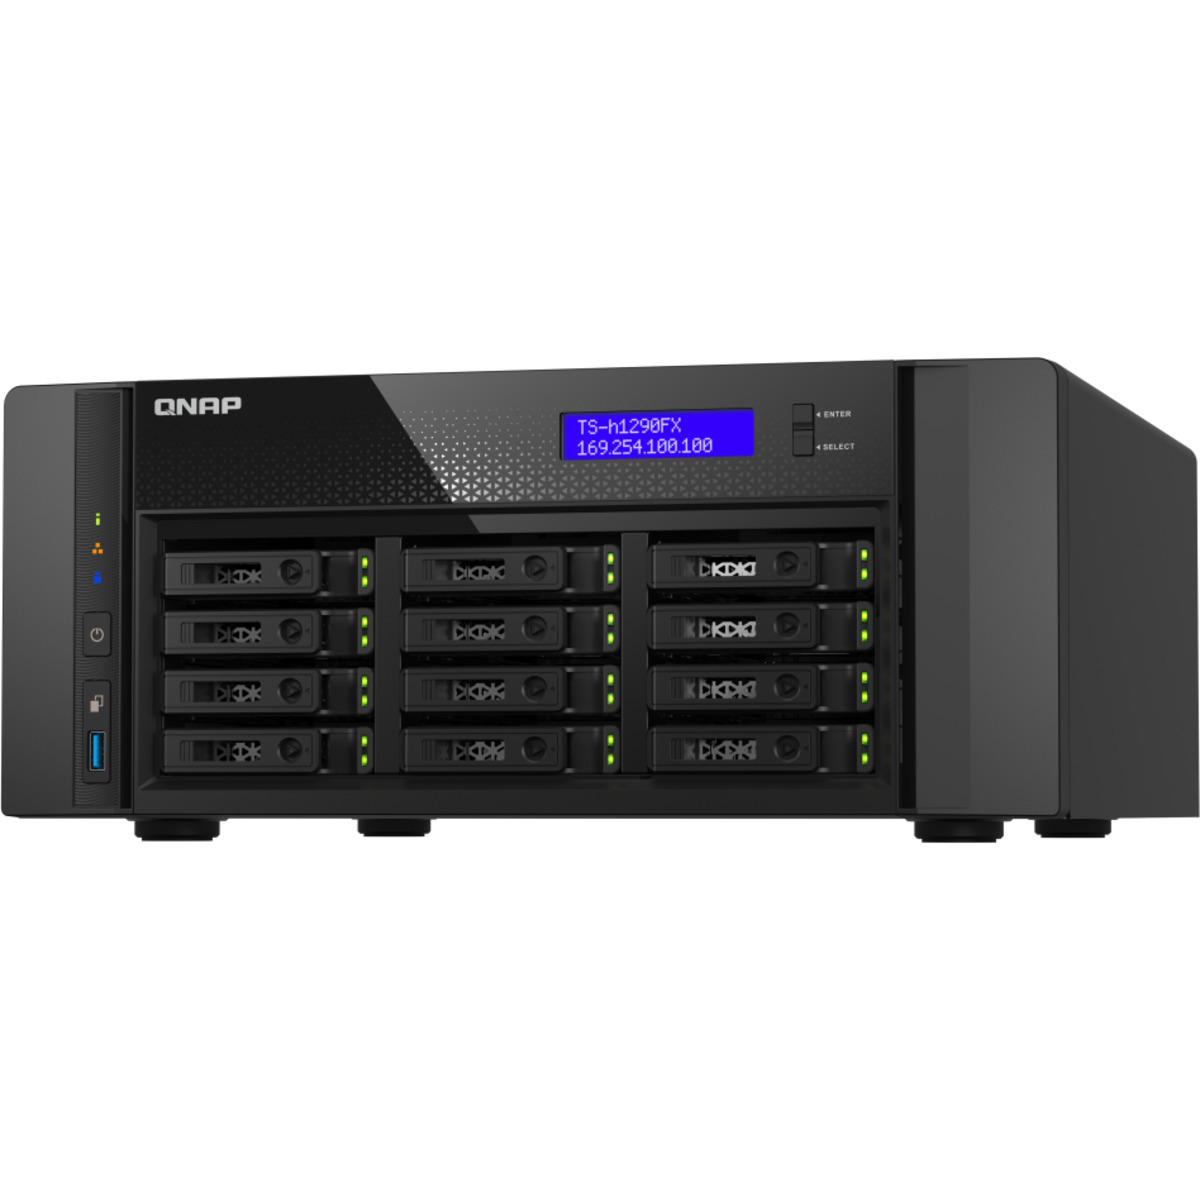 QNAP TS-h1290FX QuTS 7302P hero Edition 18tb 12-Bay Desktop Large Business / Enterprise NAS - Network Attached Storage Device 9x2tb Western Digital Red SA500 WDS200T1R0A 2.5 560/530MB/s SATA 6Gb/s SSD NAS Class Drives Installed - Burn-In Tested TS-h1290FX QuTS 7302P hero Edition